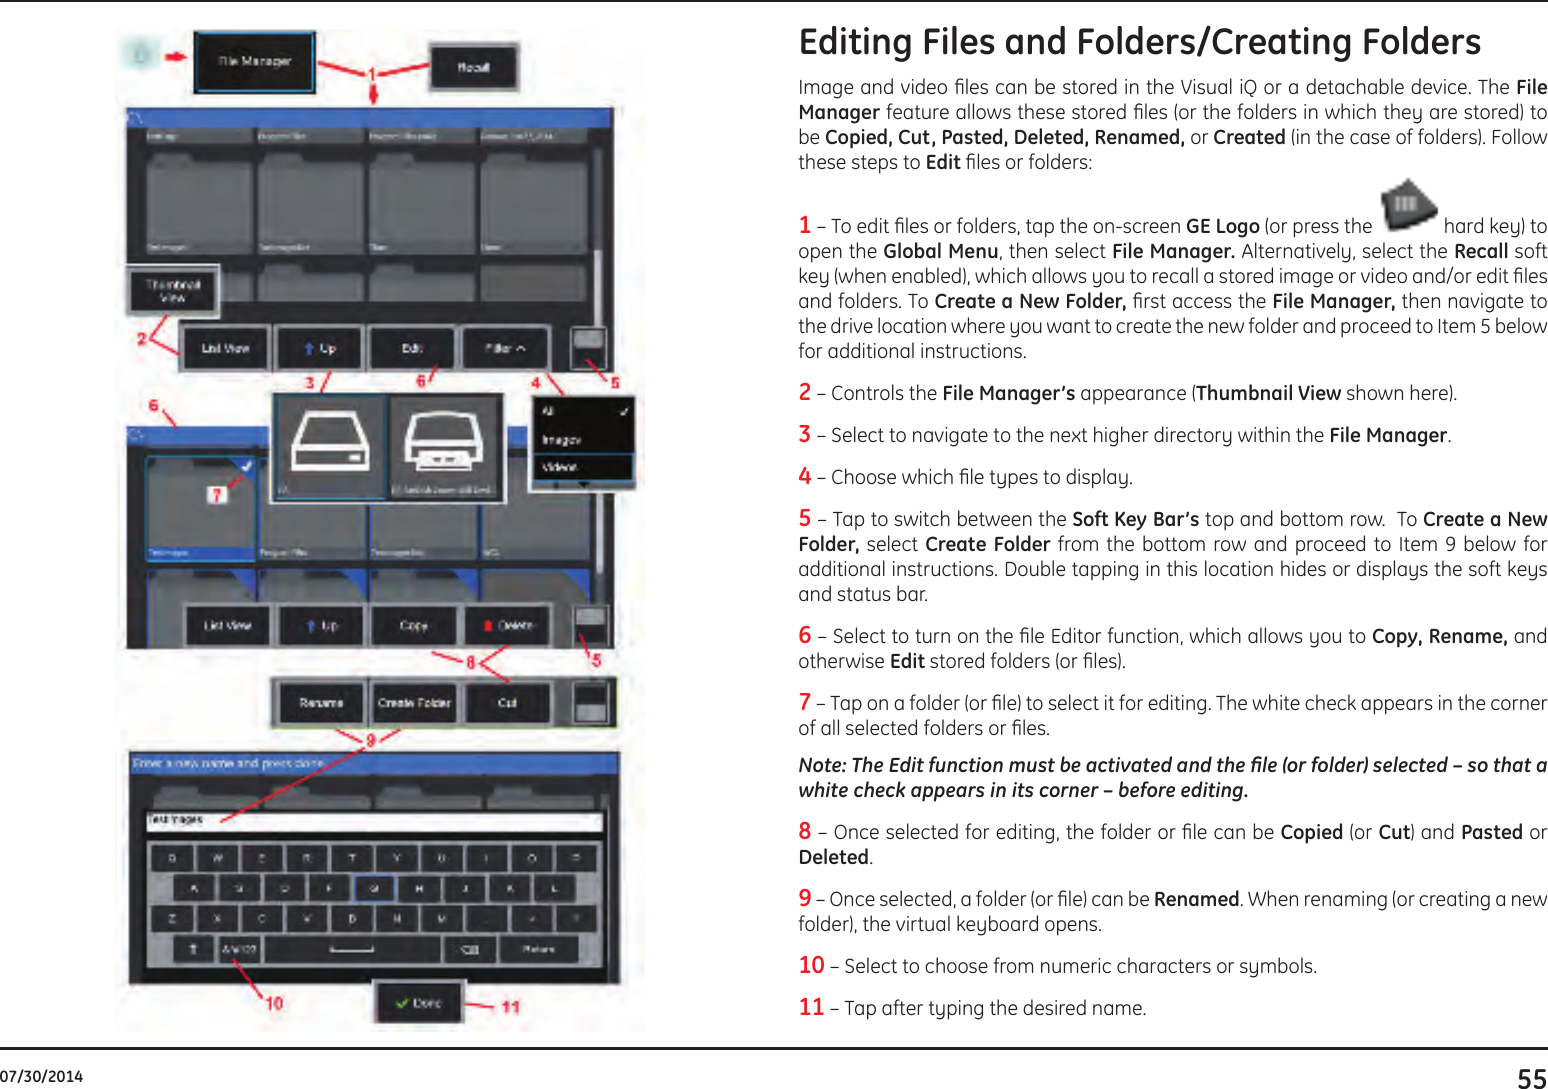 5507/30/2014Editing Files and Folders/Creating FoldersImage and video les can be stored in the Visual iQ or a detachable device. The File Manager feature allows these stored les (or the folders in which they are stored) to be Copied, Cut, Pasted, Deleted, Renamed, or Created (in the case of folders). Follow these steps to Edit les or folders:1 – To edit les or folders, tap the on-screen GE Logo (or press the   hard key) to open the Global Menu, then select File Manager. Alternatively, select the Recall soft key (when enabled), which allows you to recall a stored image or video and/or edit les and folders. To Create a New Folder, rst access the File Manager, then navigate to the drive location where you want to create the new folder and proceed to Item 5 below for additional instructions.2 – Controls the File Manager’s appearance (Thumbnail View shown here).3 – Select to navigate to the next higher directory within the File Manager.4 – Choose which le types to display.  5 – Tap to switch between the Soft Key Bar’s top and bottom row.  To Create a New Folder, select Create Folder from the bottom row and proceed to Item 9 below for additional instructions. Double tapping in this location hides or displays the soft keys and status bar.6 – Select to turn on the le Editor function, which allows you to Copy, Rename, and otherwise Edit stored folders (or les).7 – Tap on a folder (or le) to select it for editing. The white check appears in the corner of all selected folders or les. Note: The Edit function must be activated and the le (or folder) selected – so that a white check appears in its corner – before editing.8 – Once selected for editing, the folder or le can be Copied (or Cut) and Pasted or Deleted.   9 – Once selected, a folder (or le) can be Renamed. When renaming (or creating a new folder), the virtual keyboard opens. 10 – Select to choose from numeric characters or symbols.11 – Tap after typing the desired name. 